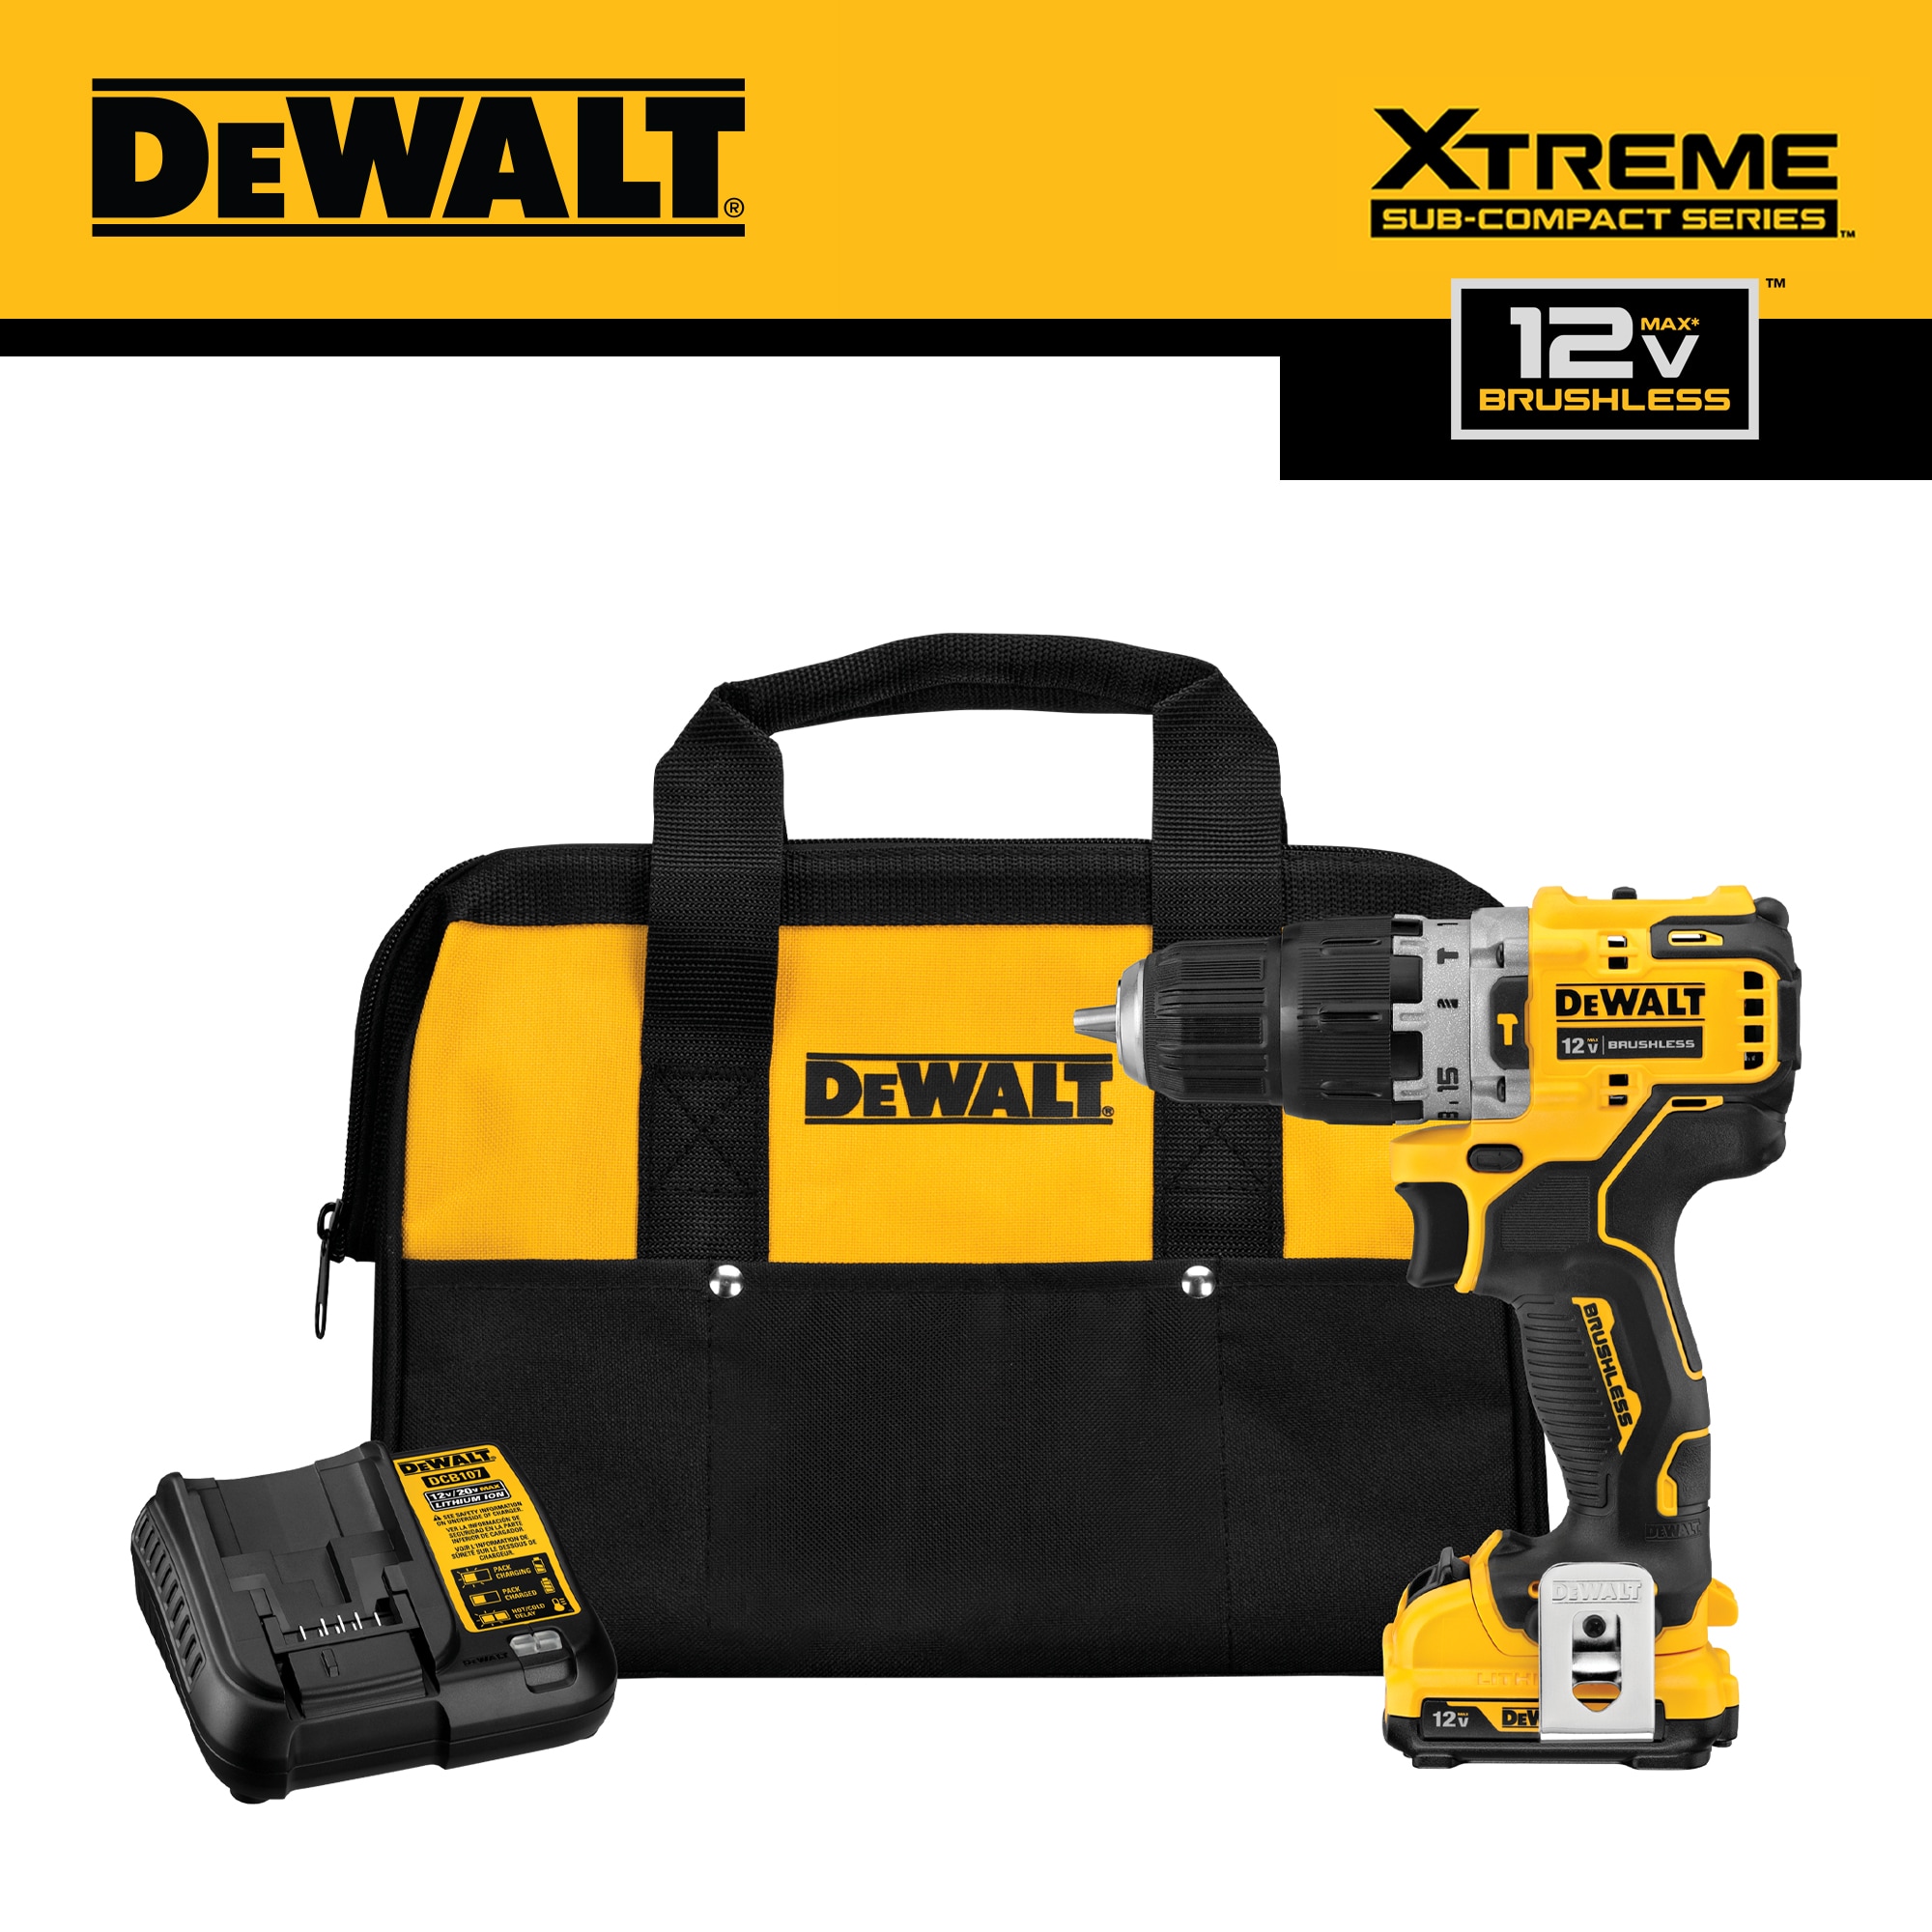 12V Cordless 3/8 in. Drill/Driver and Flashlight Kit